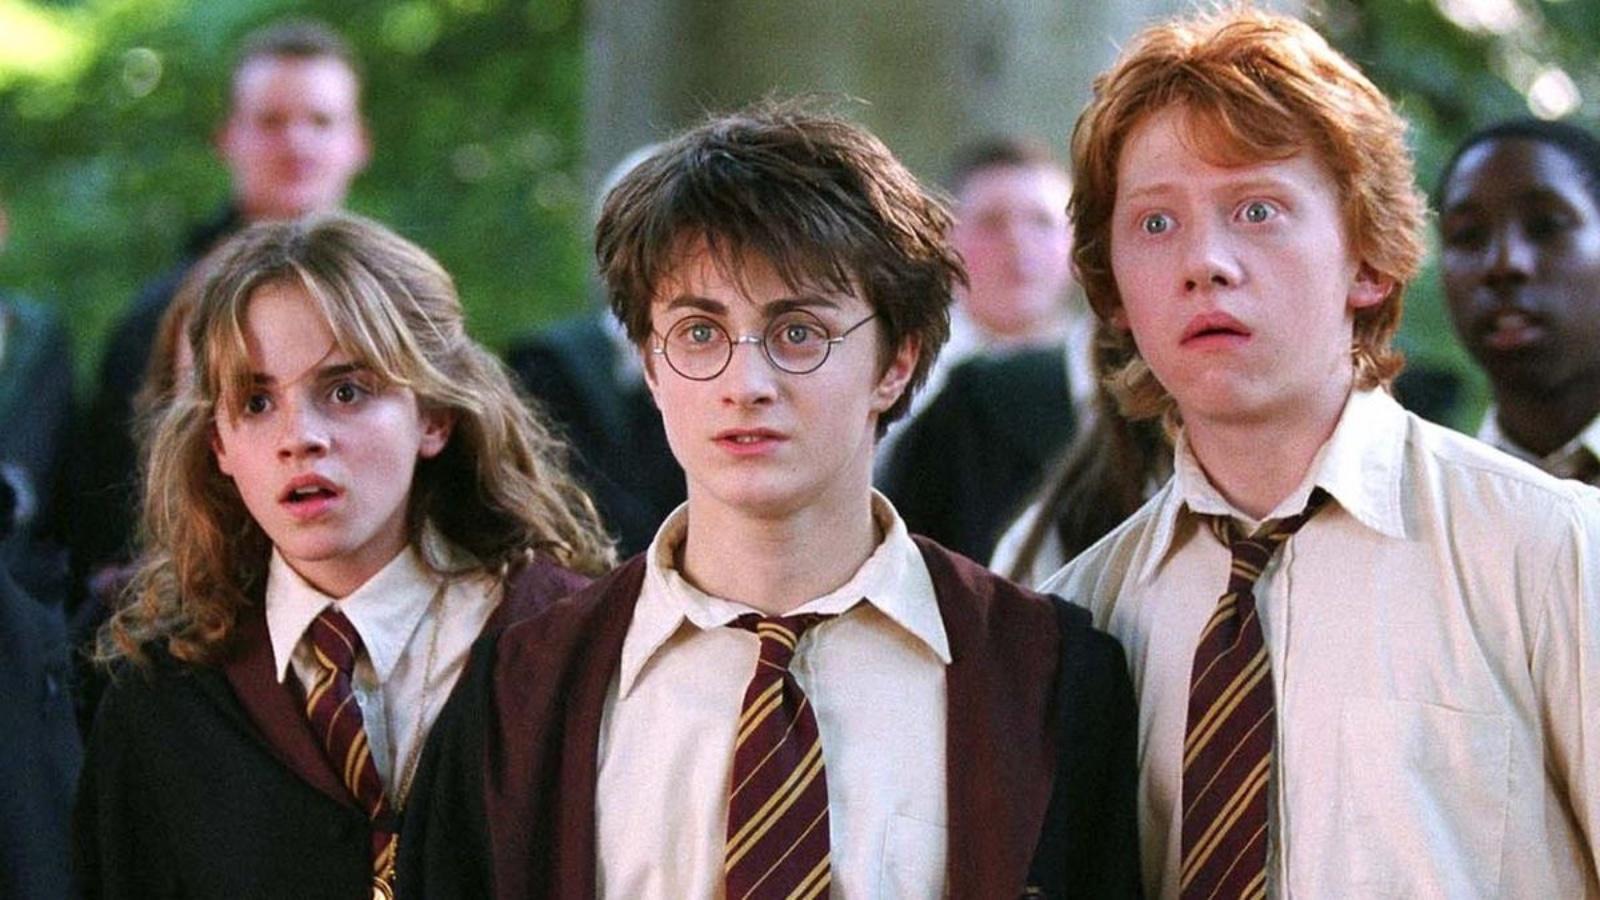 Hermione, Harry and Ron in Harry Potter in Prisoner of Azkaban movie.